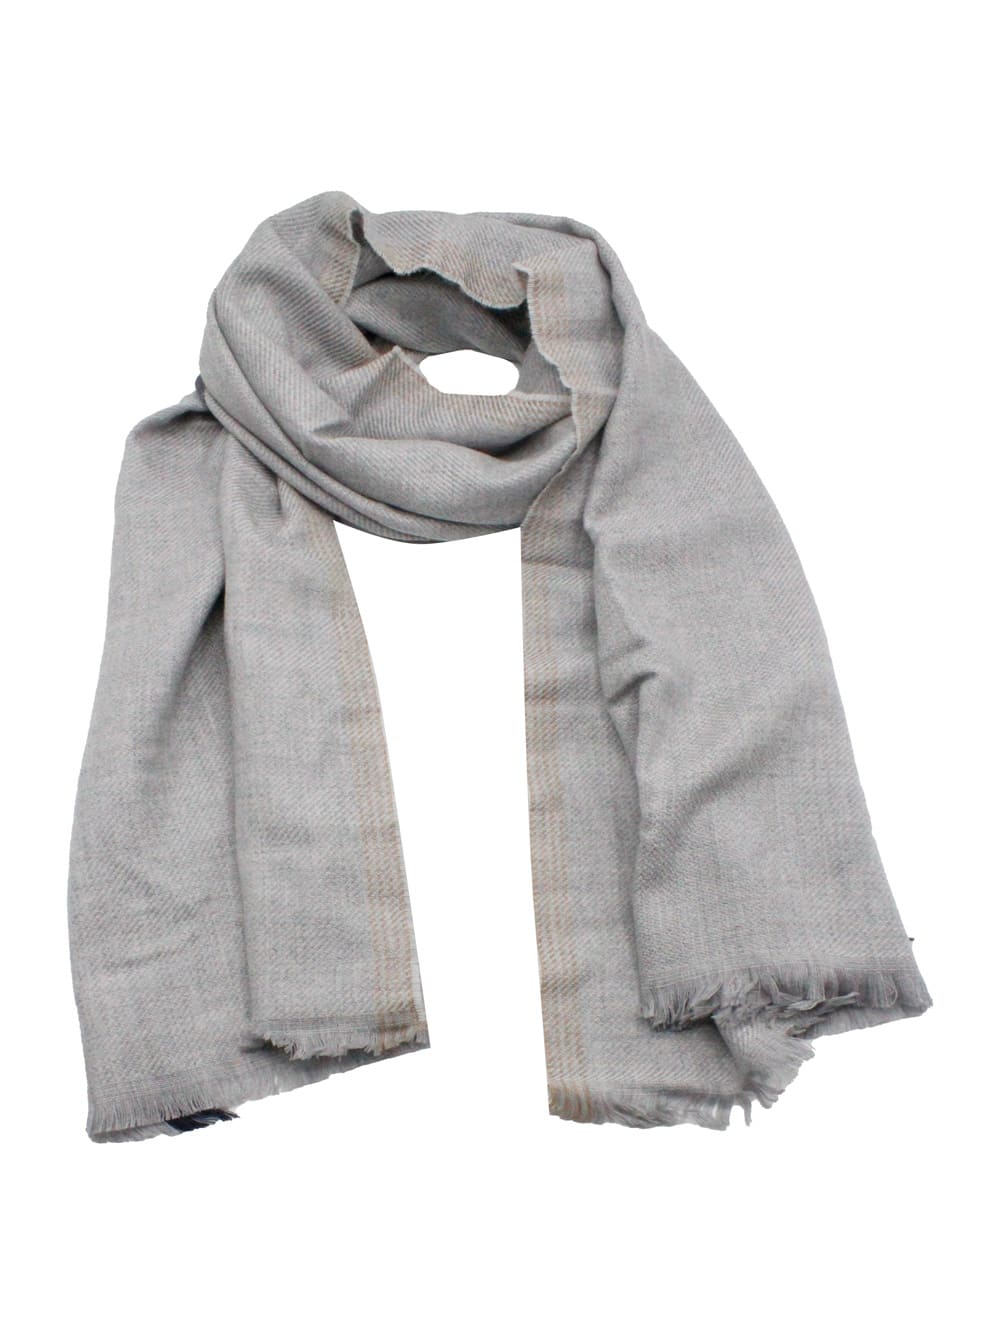 Lightweight Scarf Made Of Wool And Cashmere With A Light Weave In Diagonaòle And Side Selvedge With Small Fringes At The Bottom